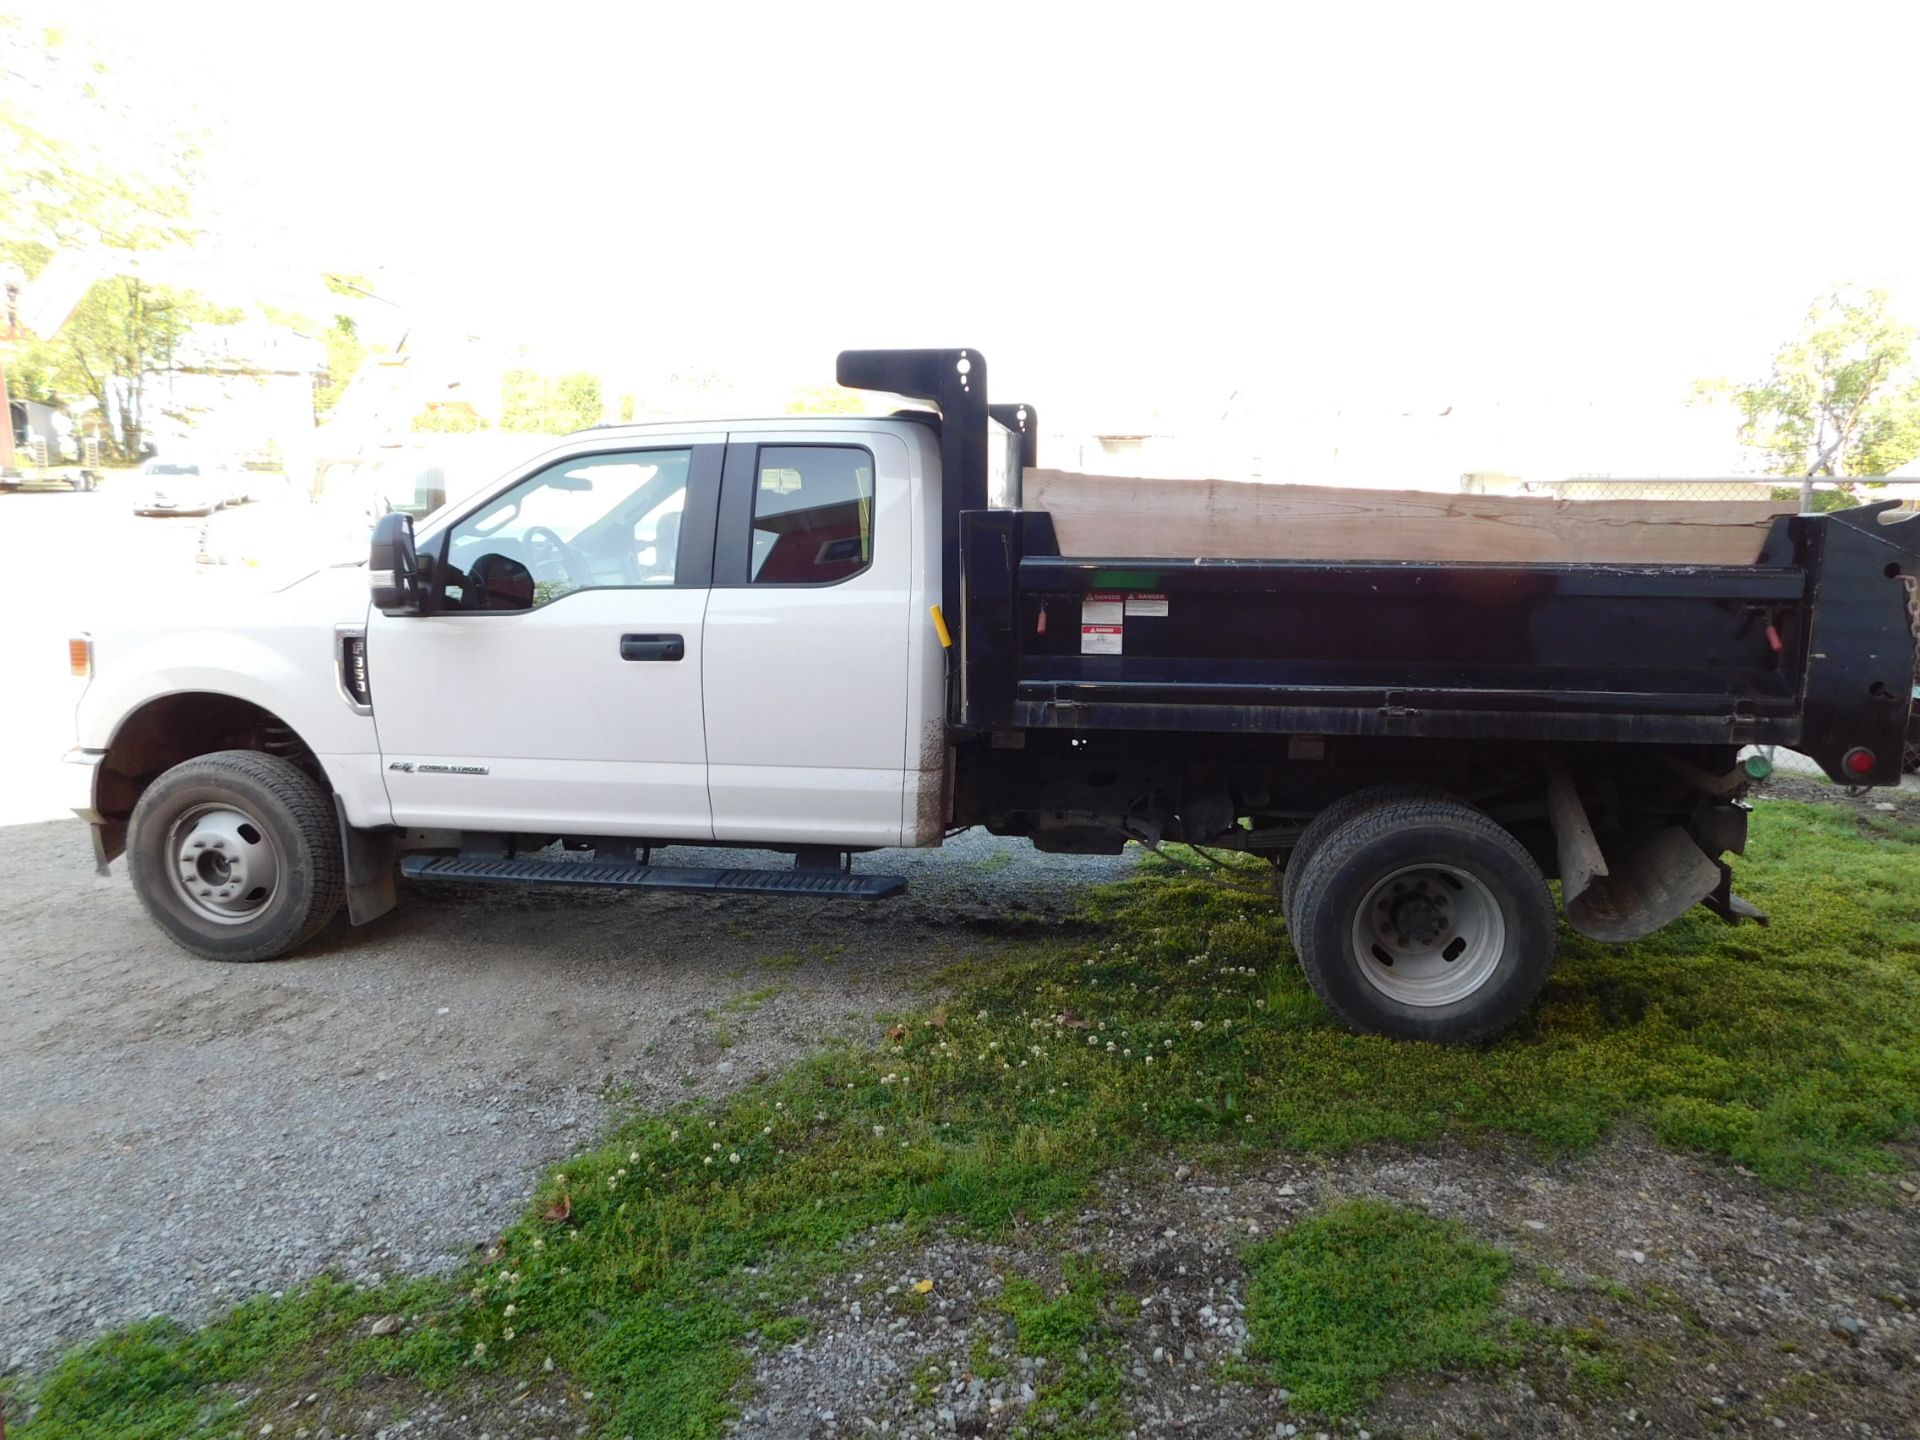 2020 Ford F-350XL Single Axle Dump Truck vin 1FD8X3HT6LEE89344, 6.7 Diesel Engine, Automatic - Image 9 of 56